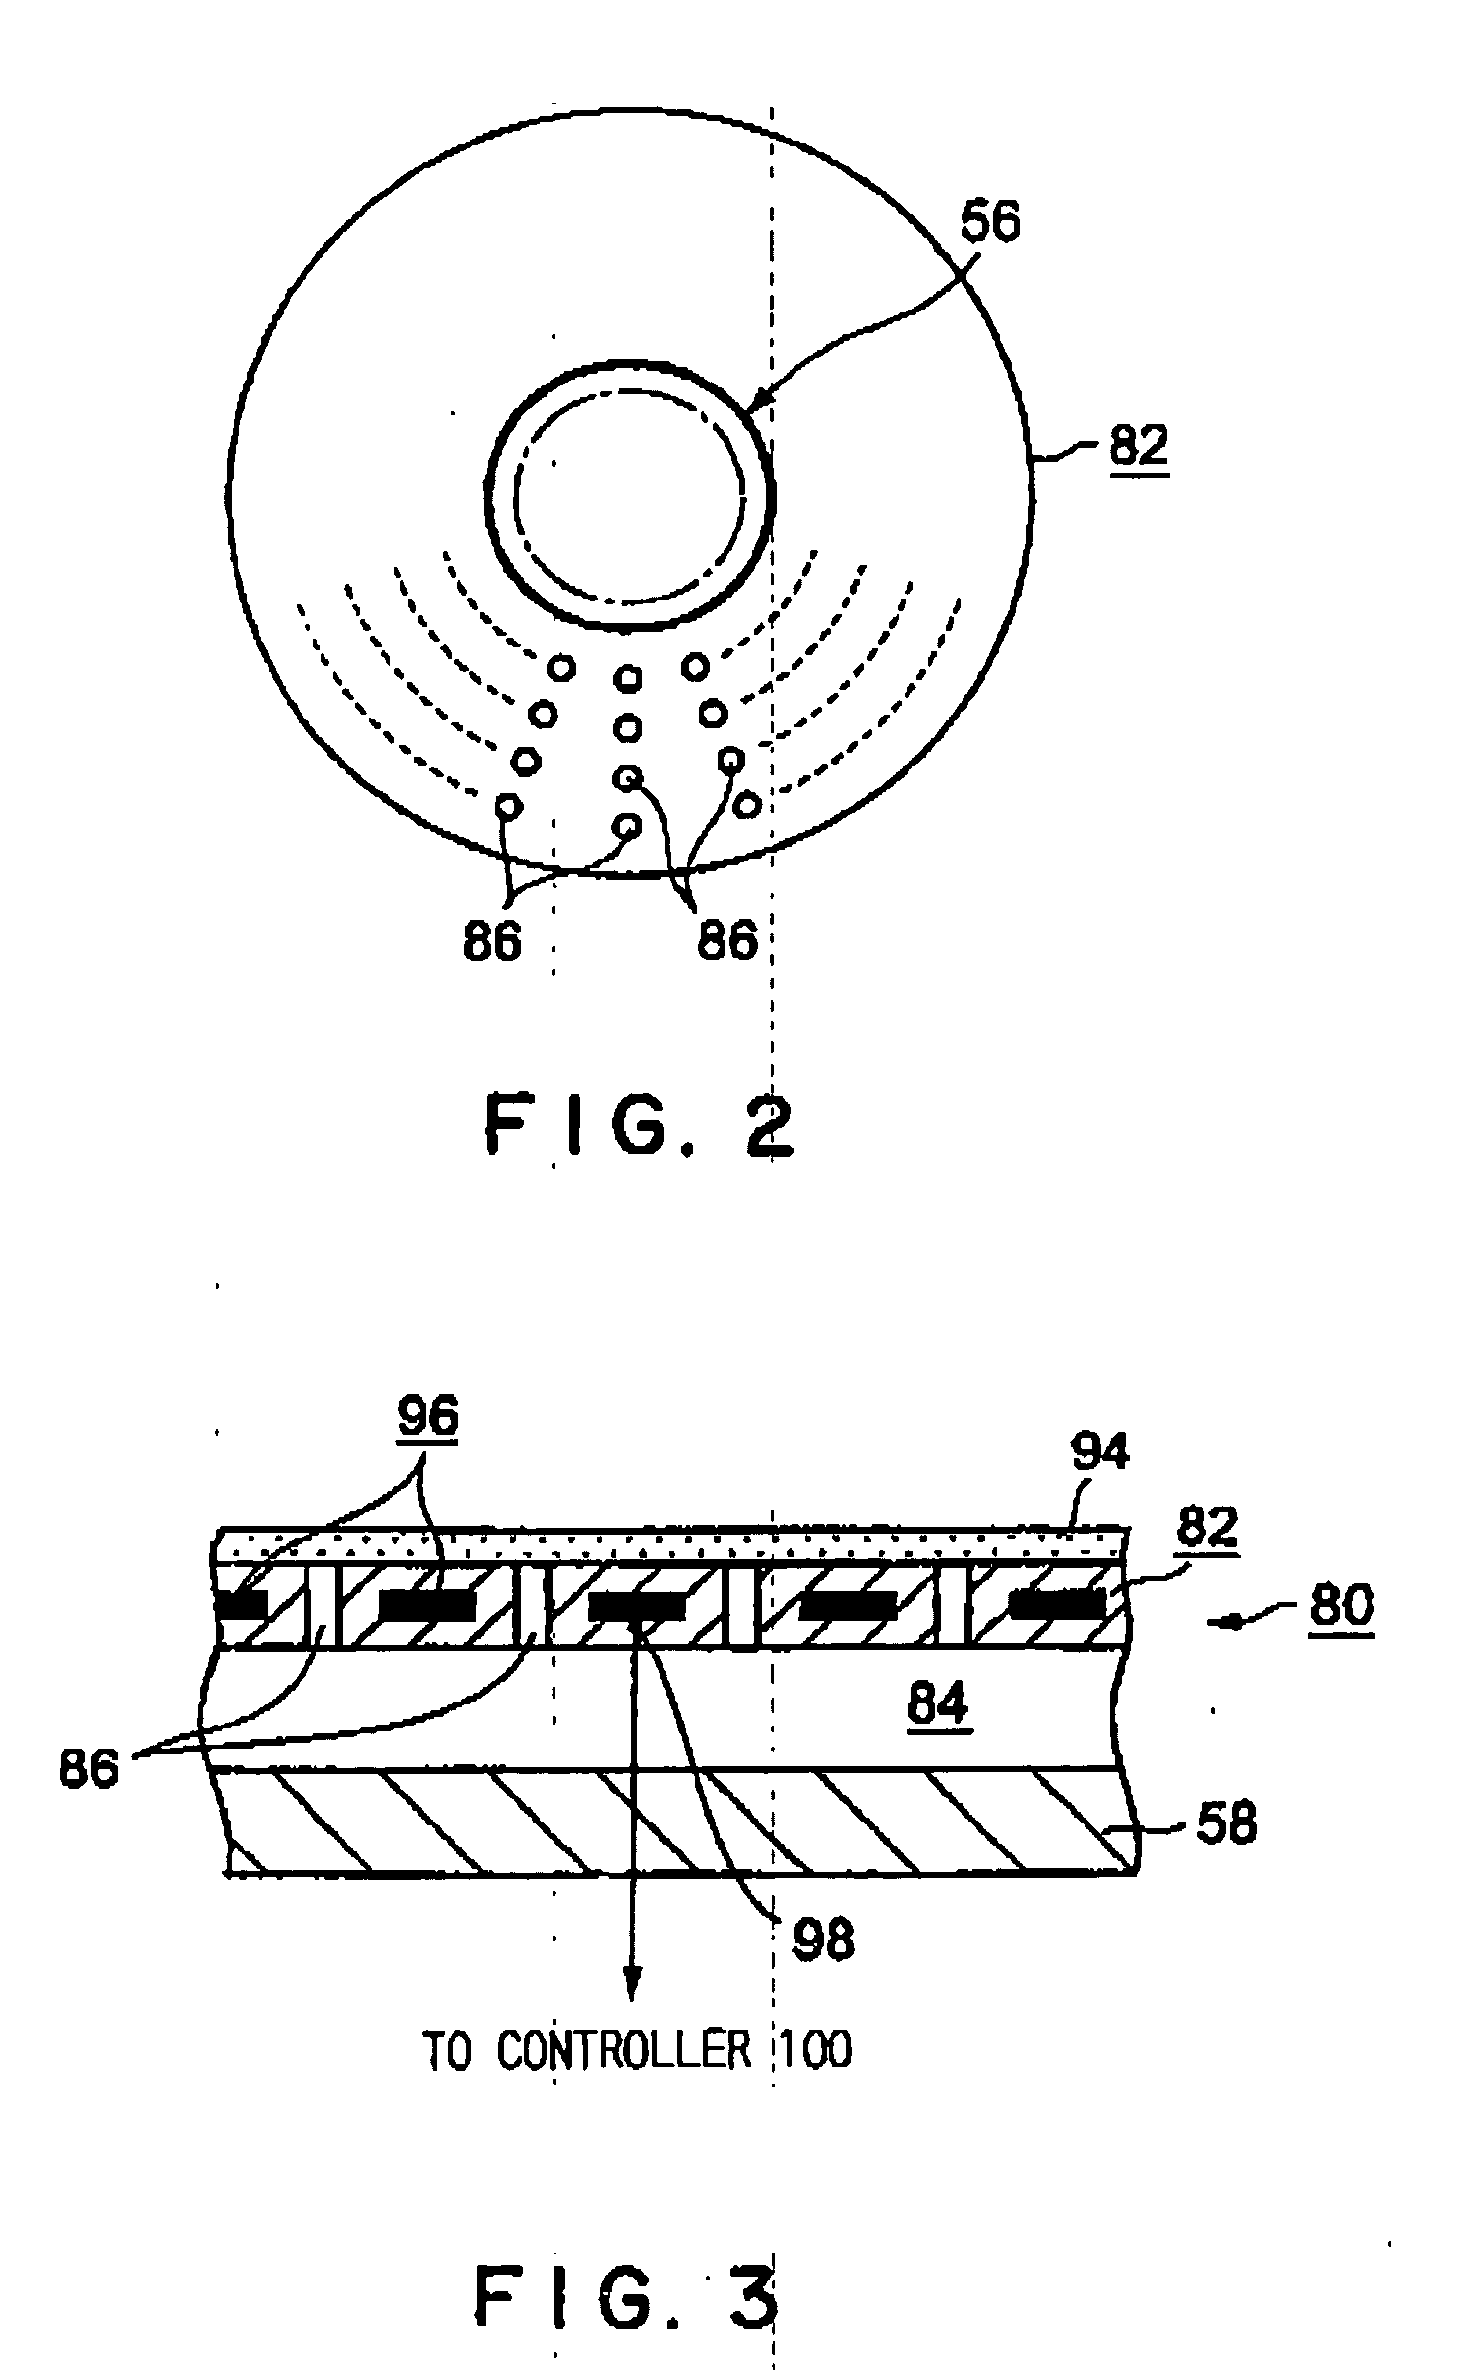 Gas supply system and processing system